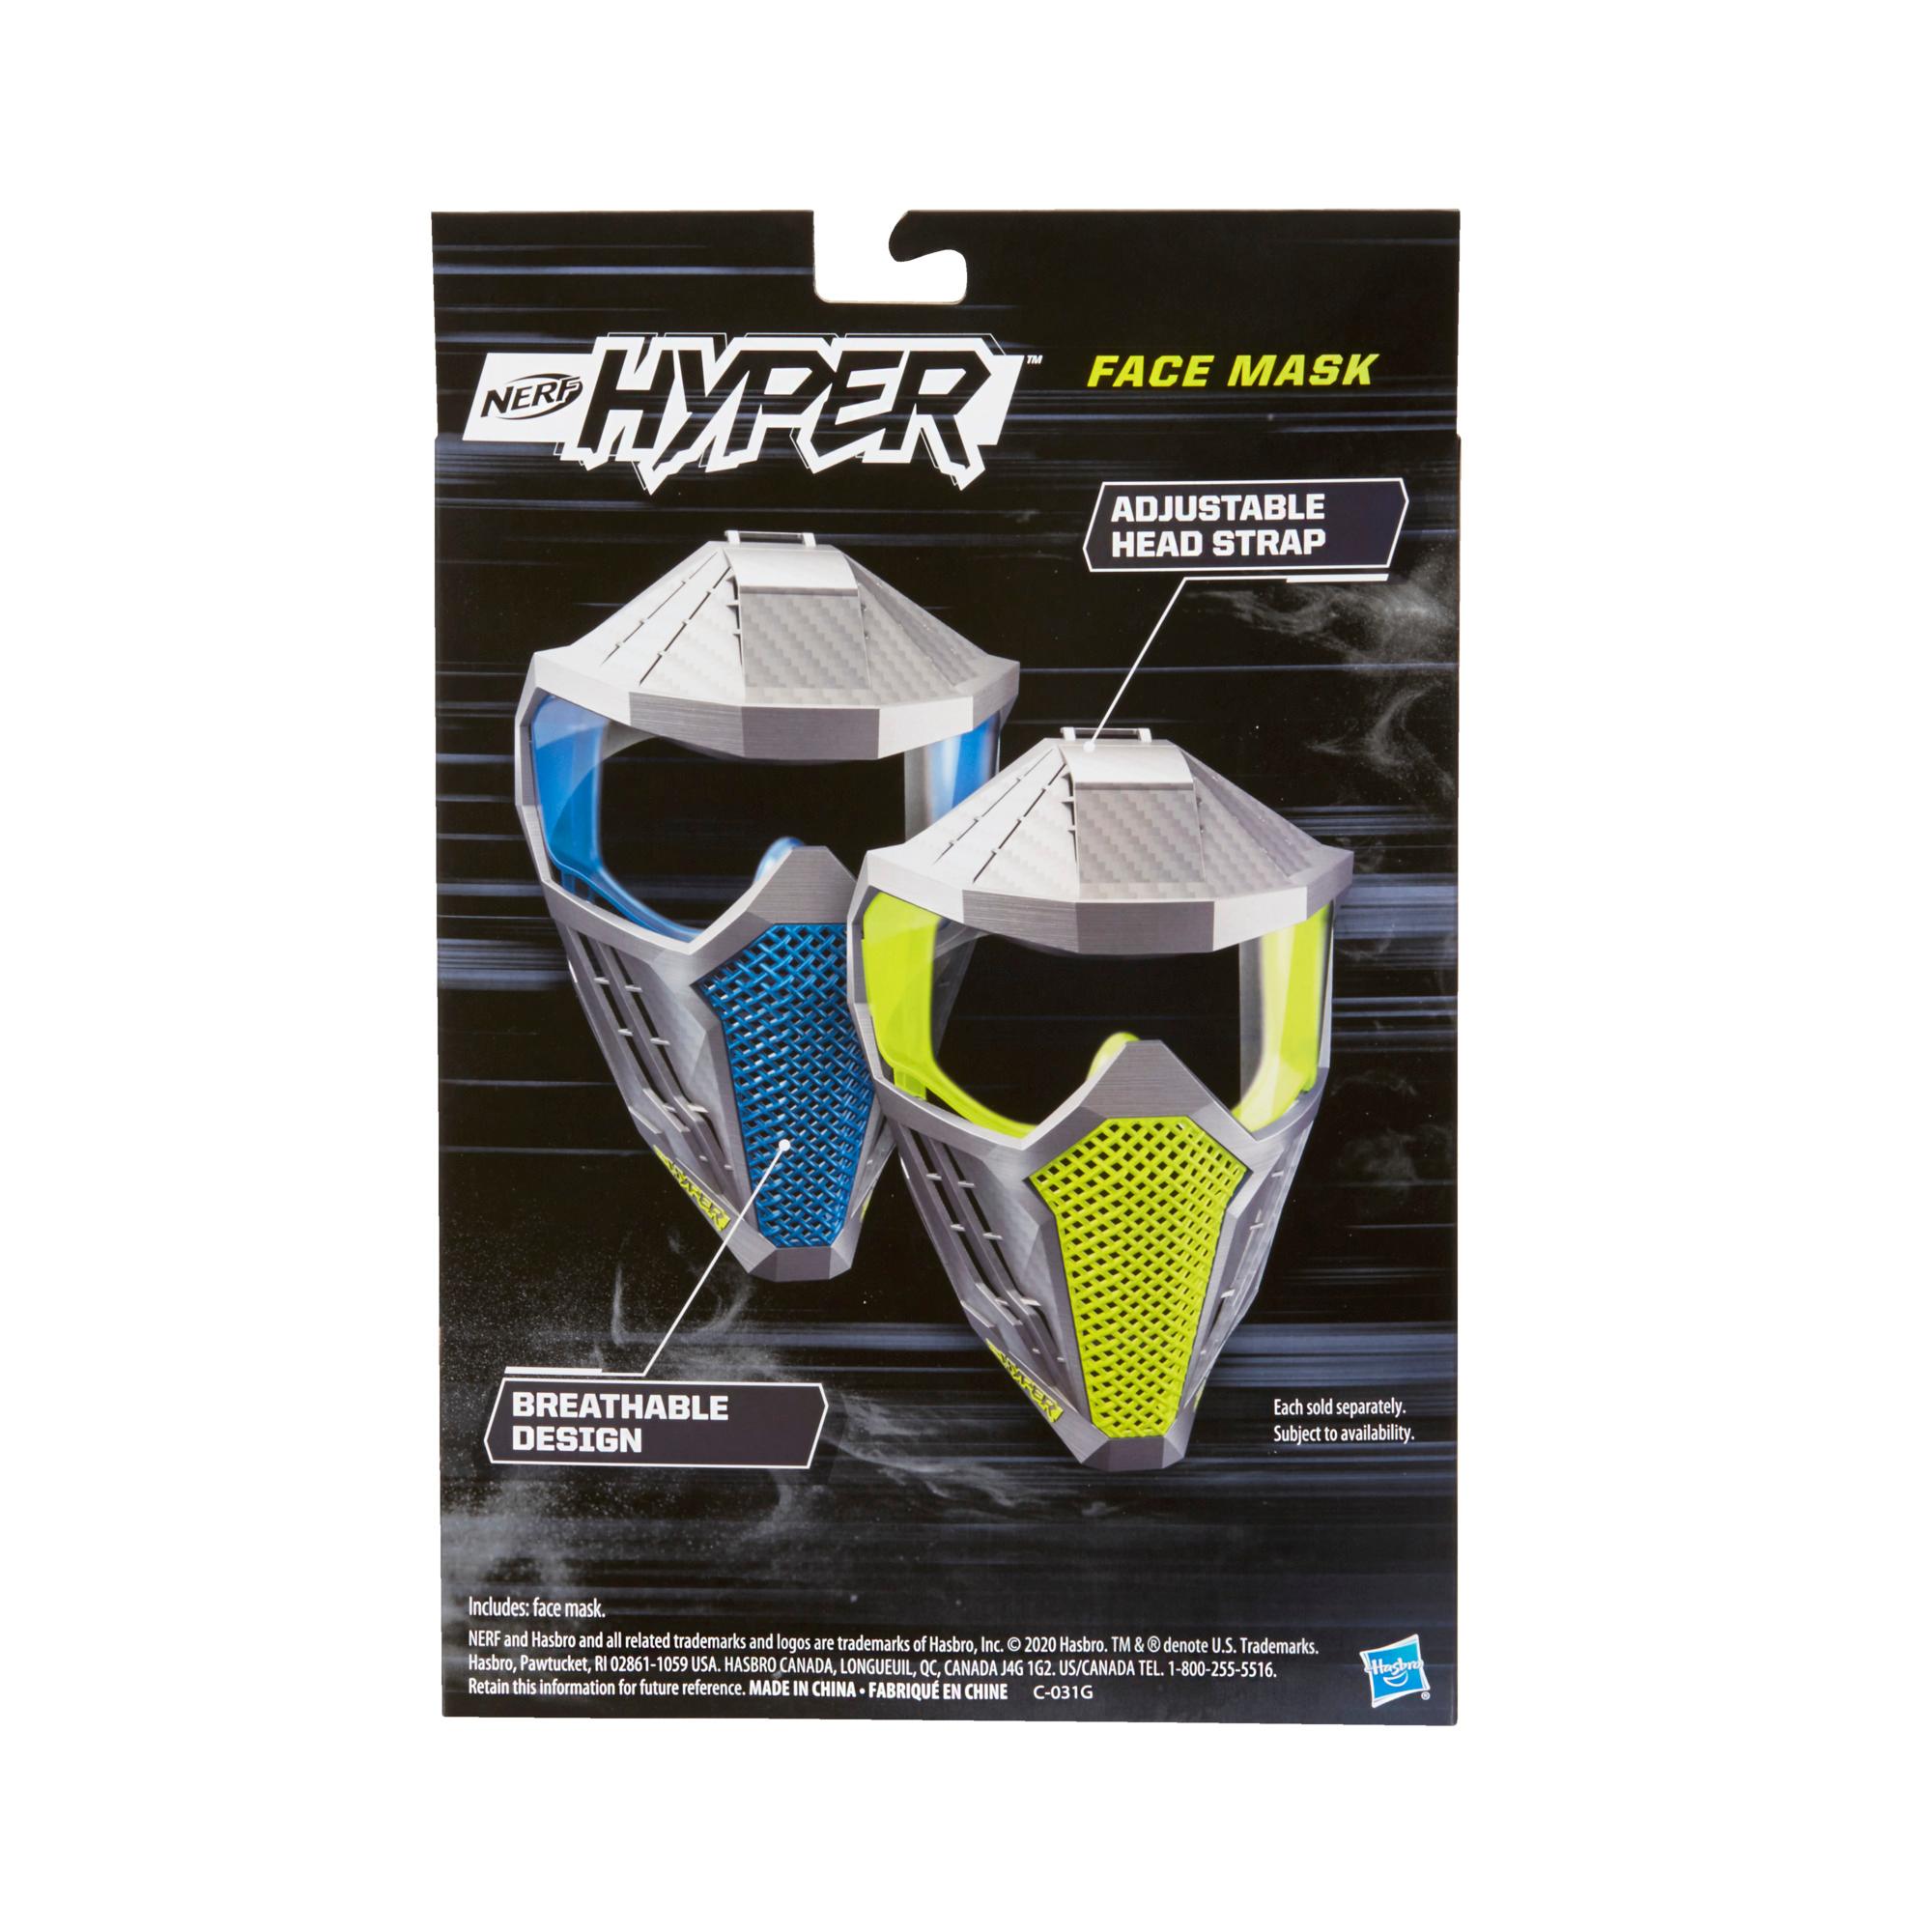 Nerf Hyper Face Mask -- Breathable Design, Adjustable Head Strap, Green Team Color -- For Teens, Adults